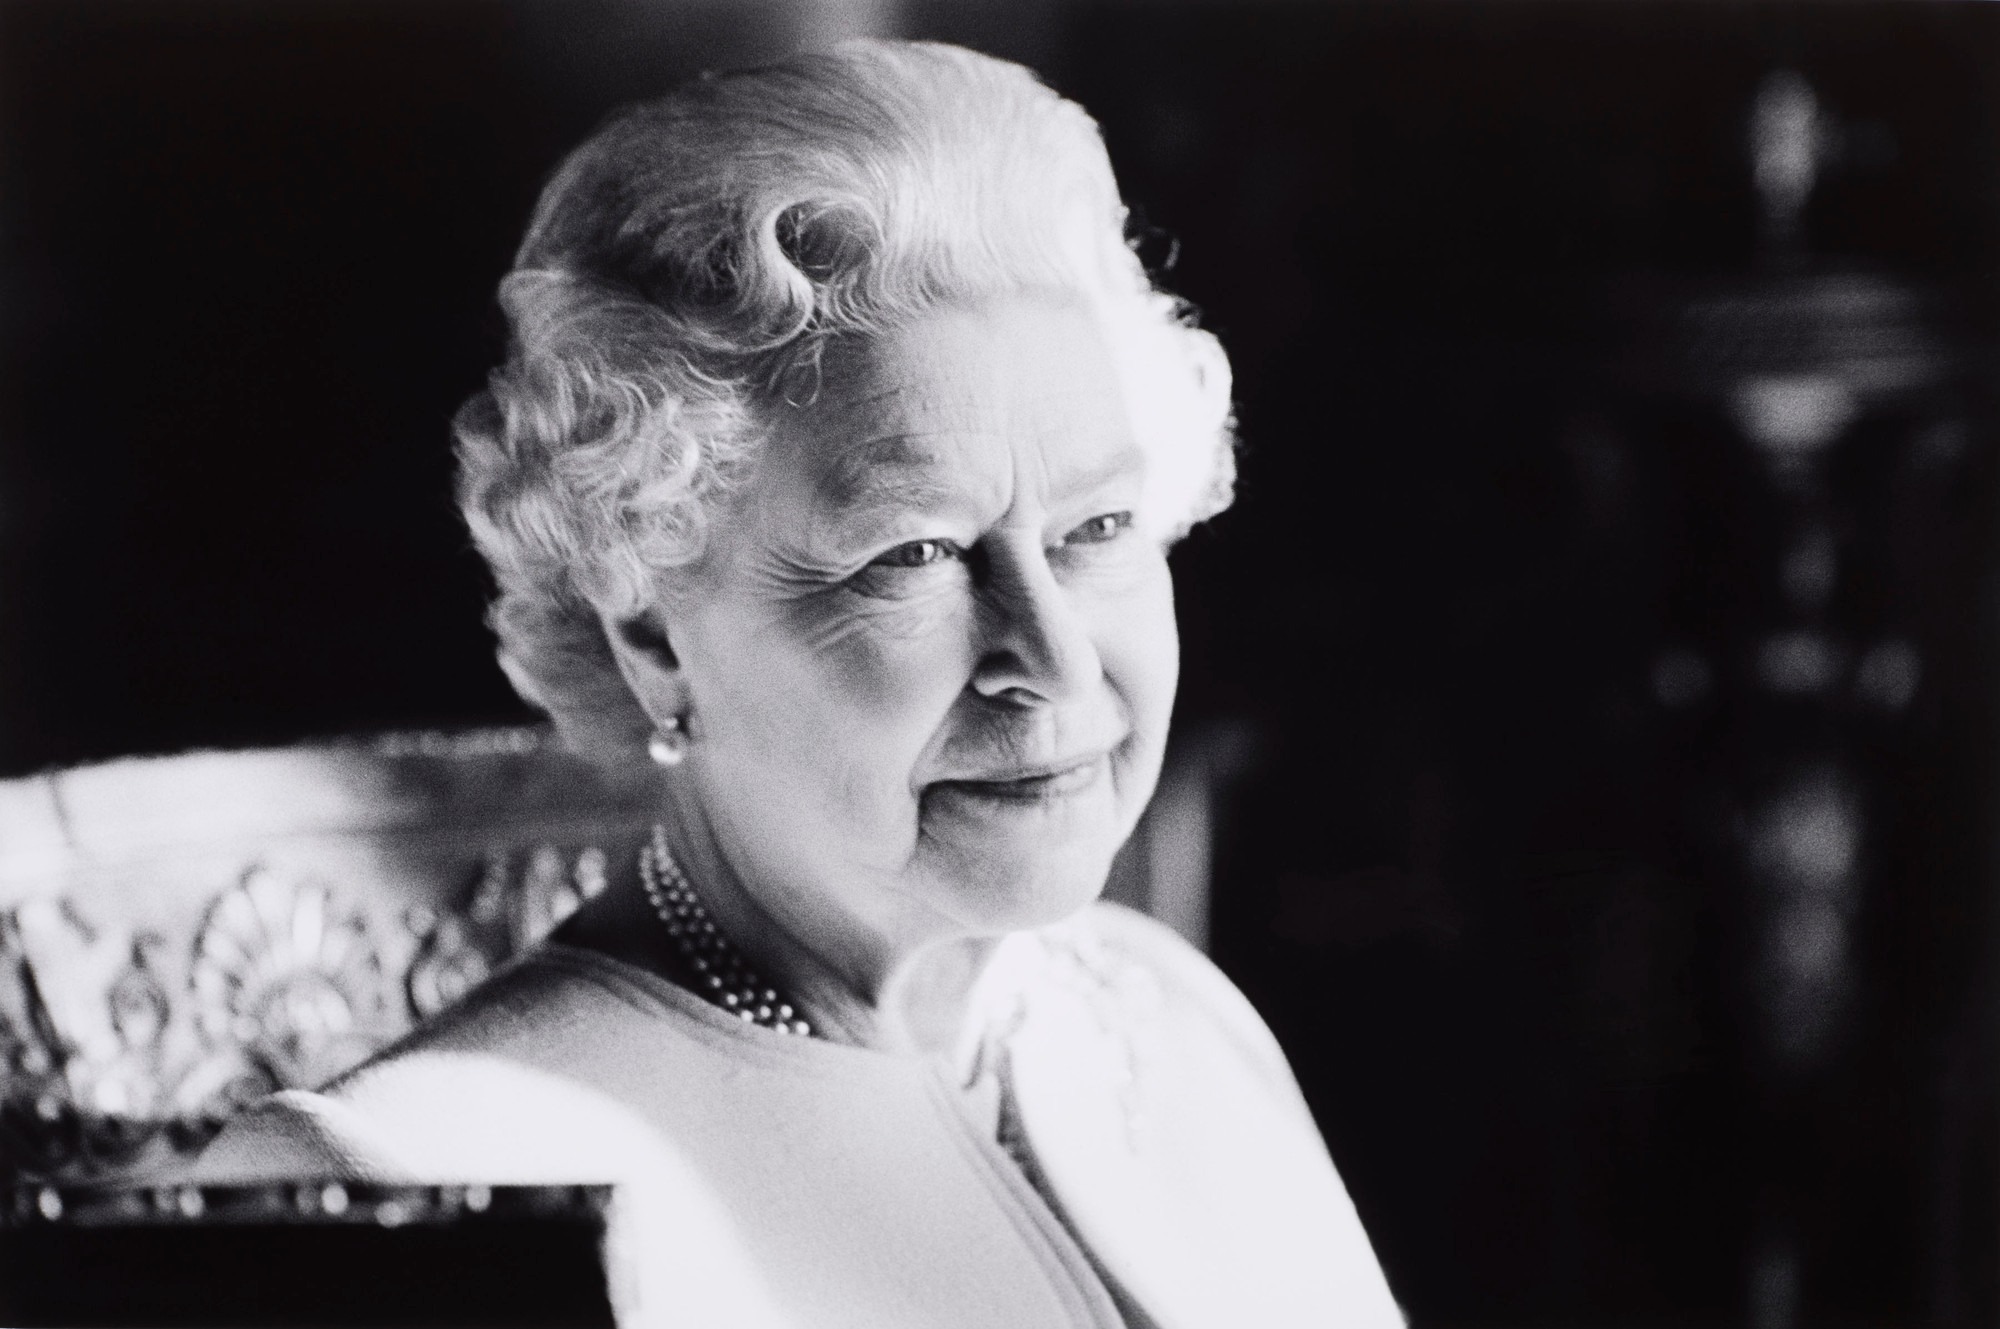 Her Majesty The Queen is photographed sitting down and looking off to the side of the camera in a black and white photograph.